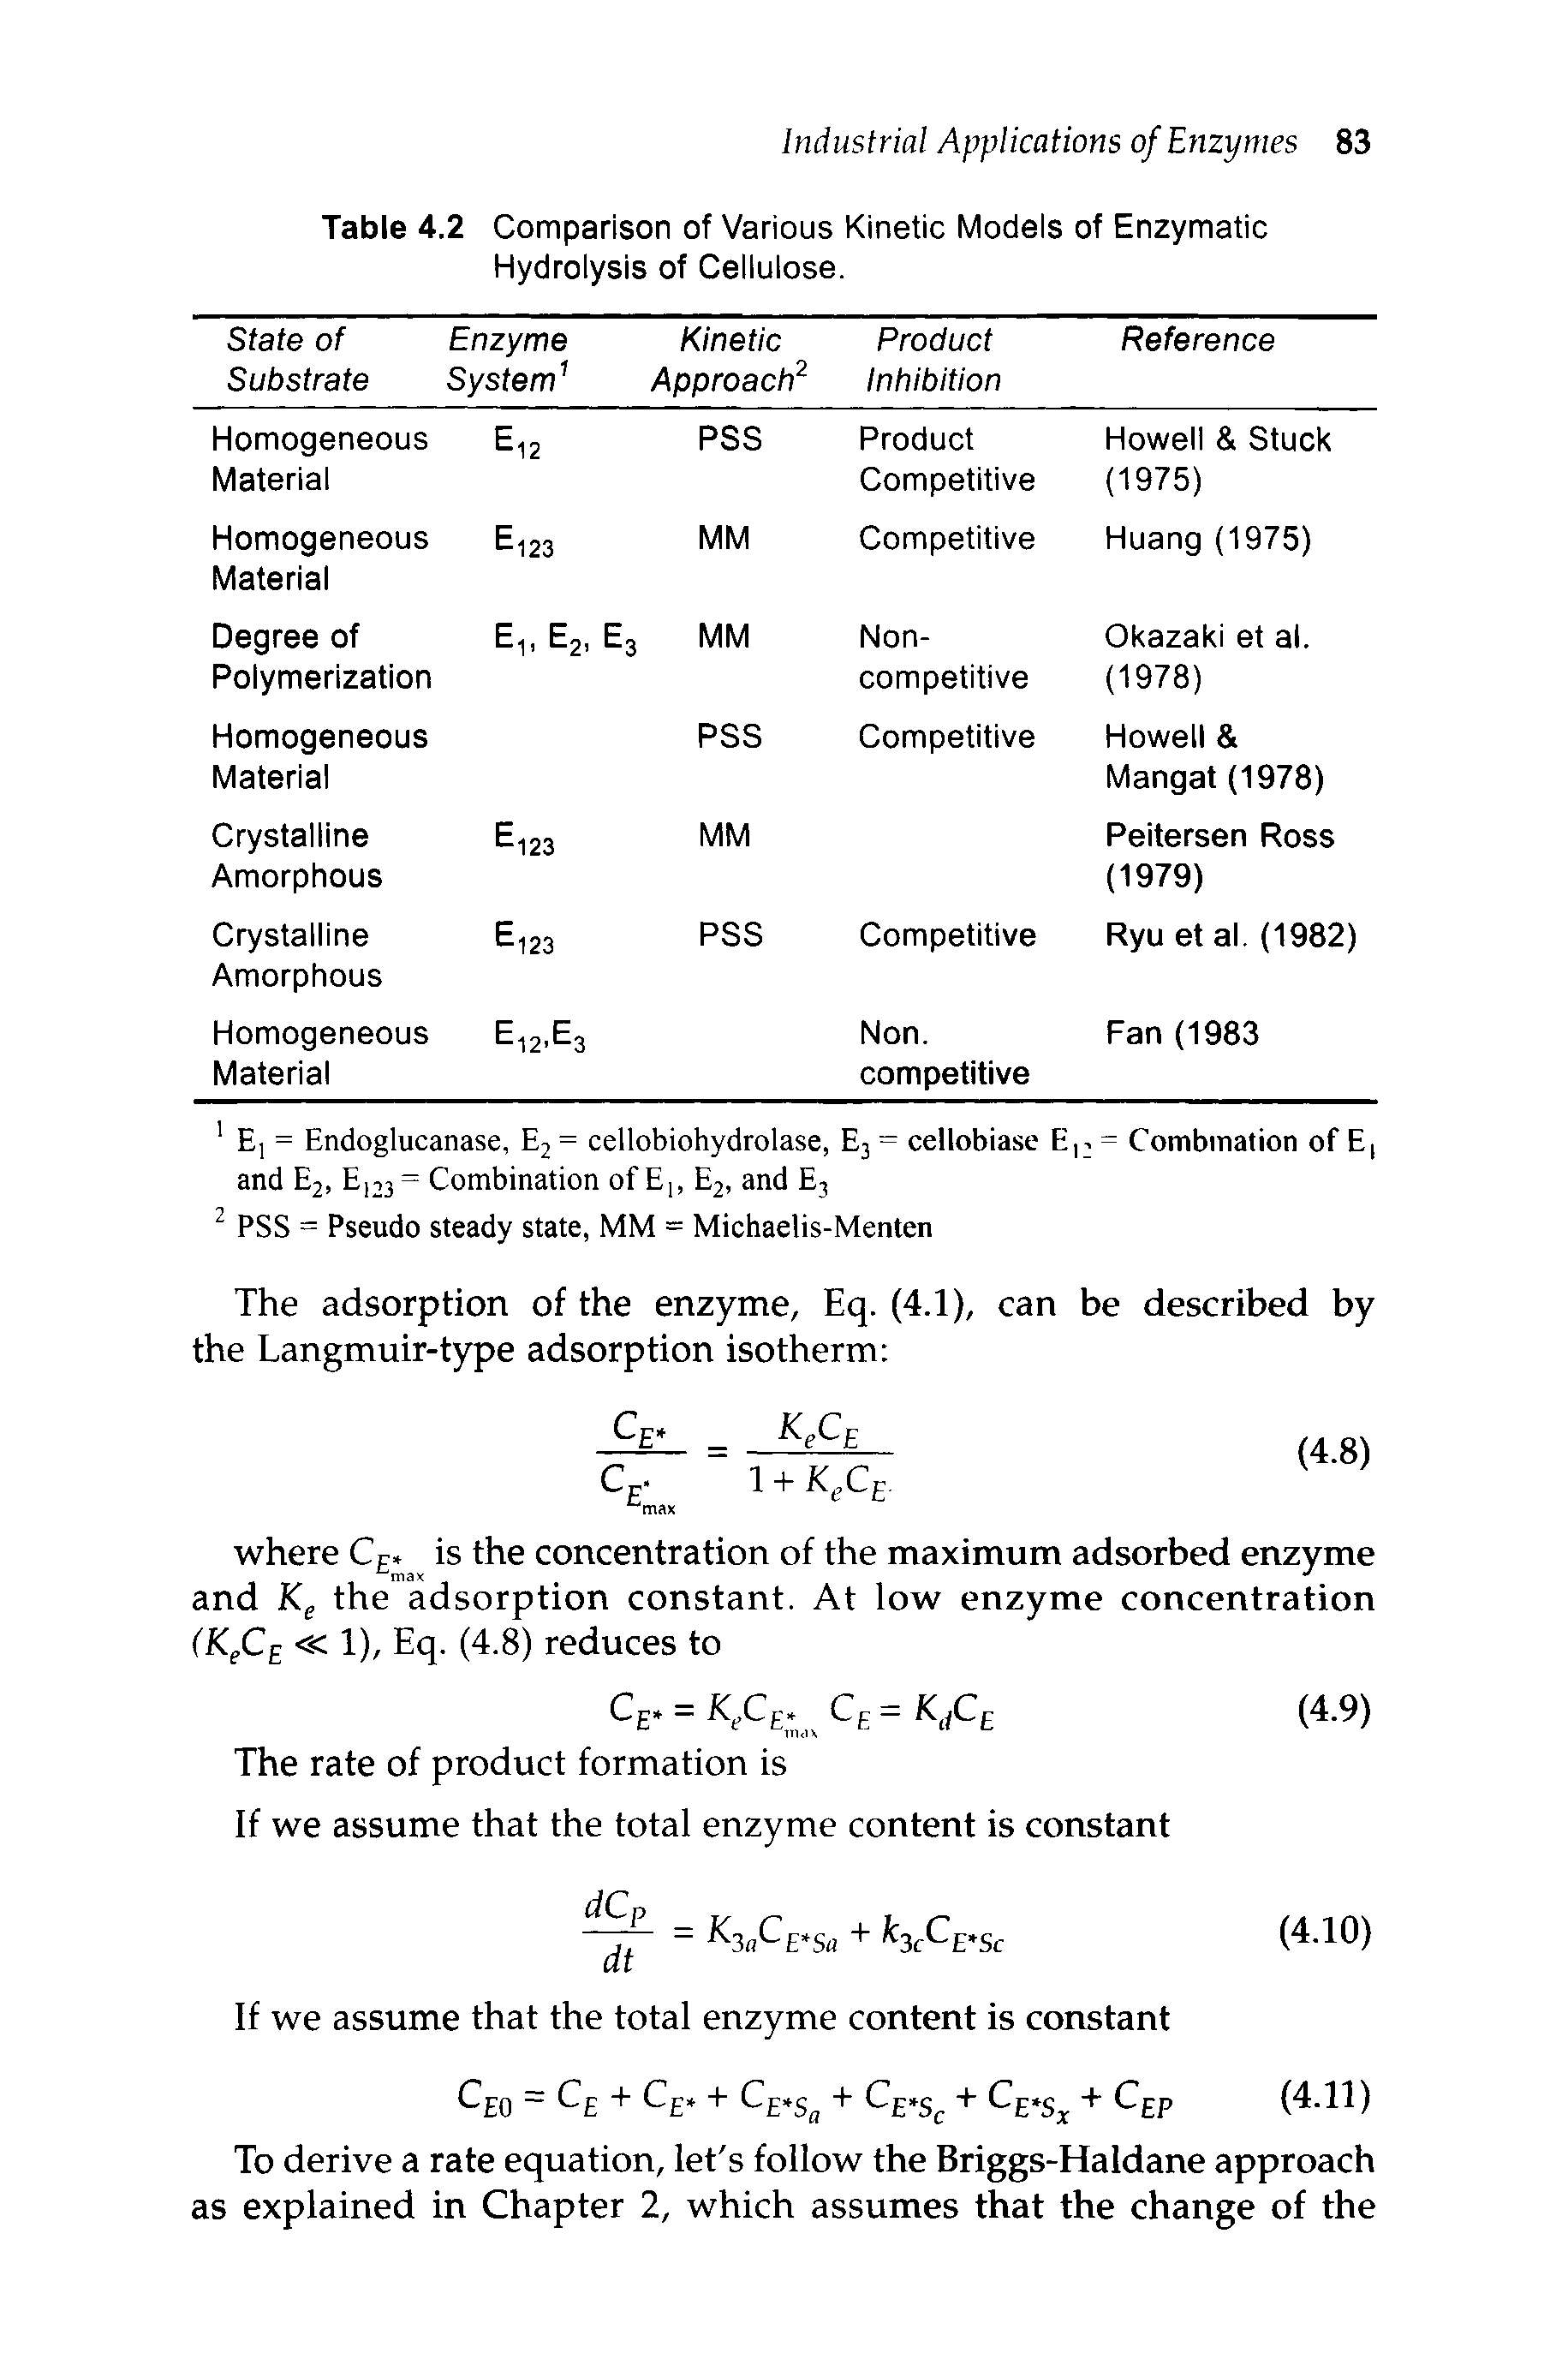 Table 4.2 Comparison of Various Kinetic Models of Enzymatic Hydrolysis of Cellulose.